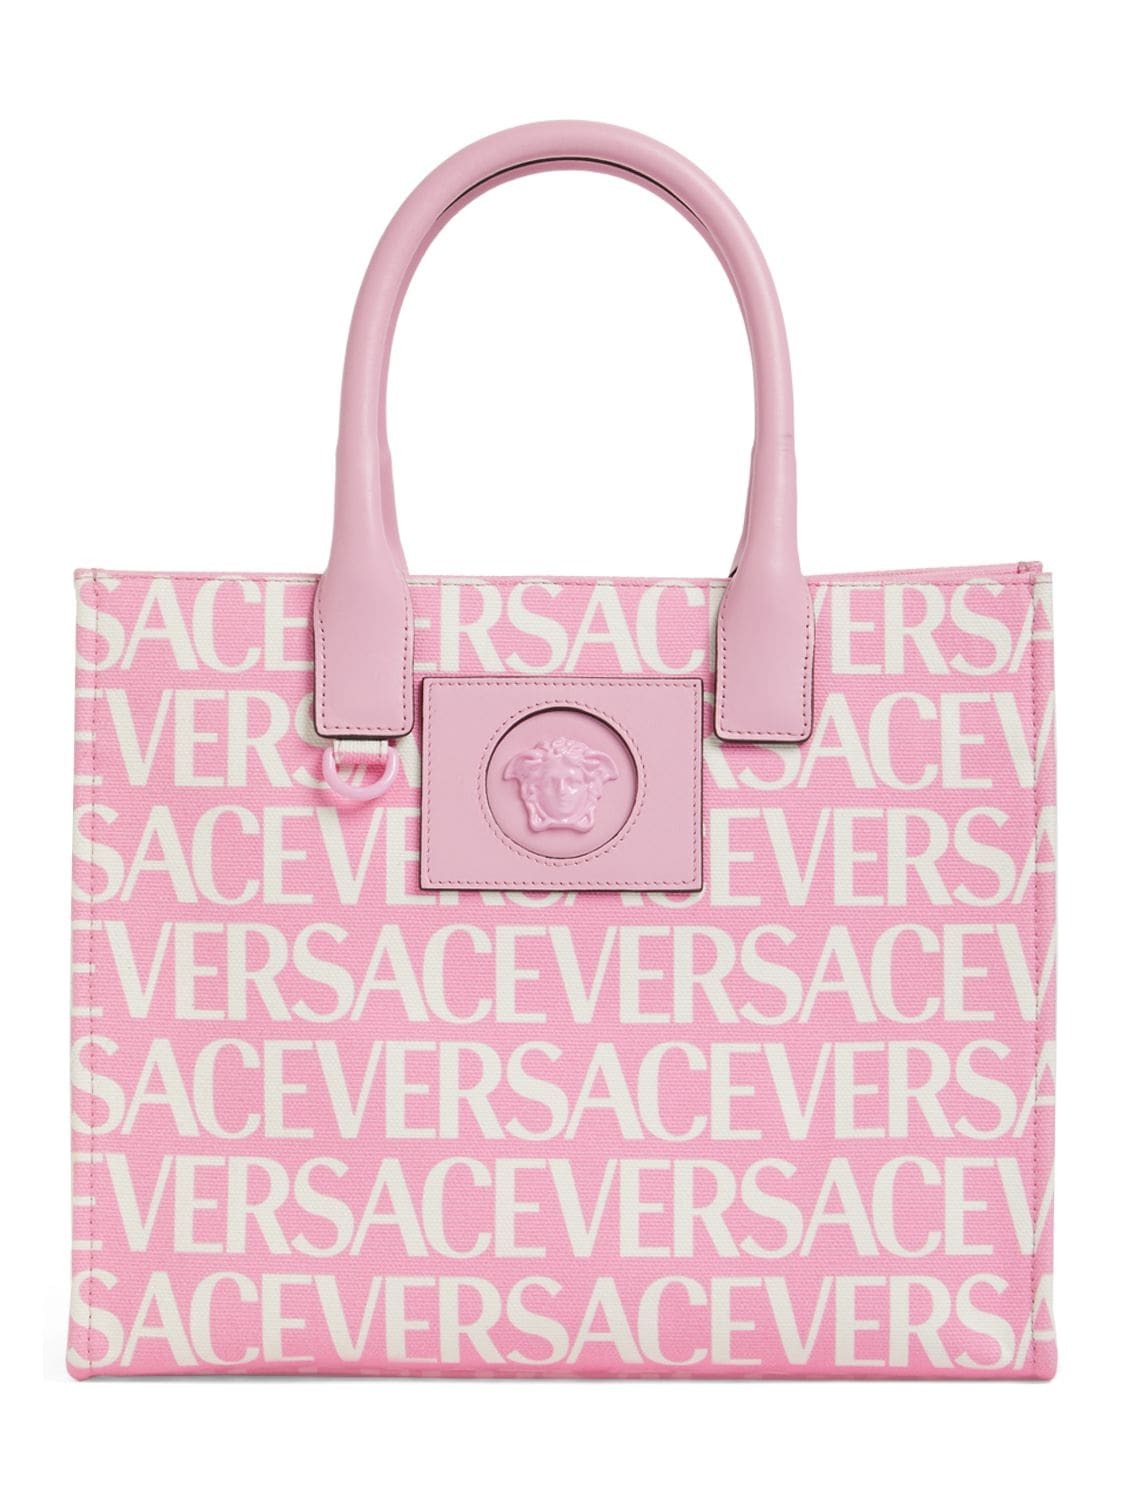 VERSACE Canvas & Leather Tote Bag in pink